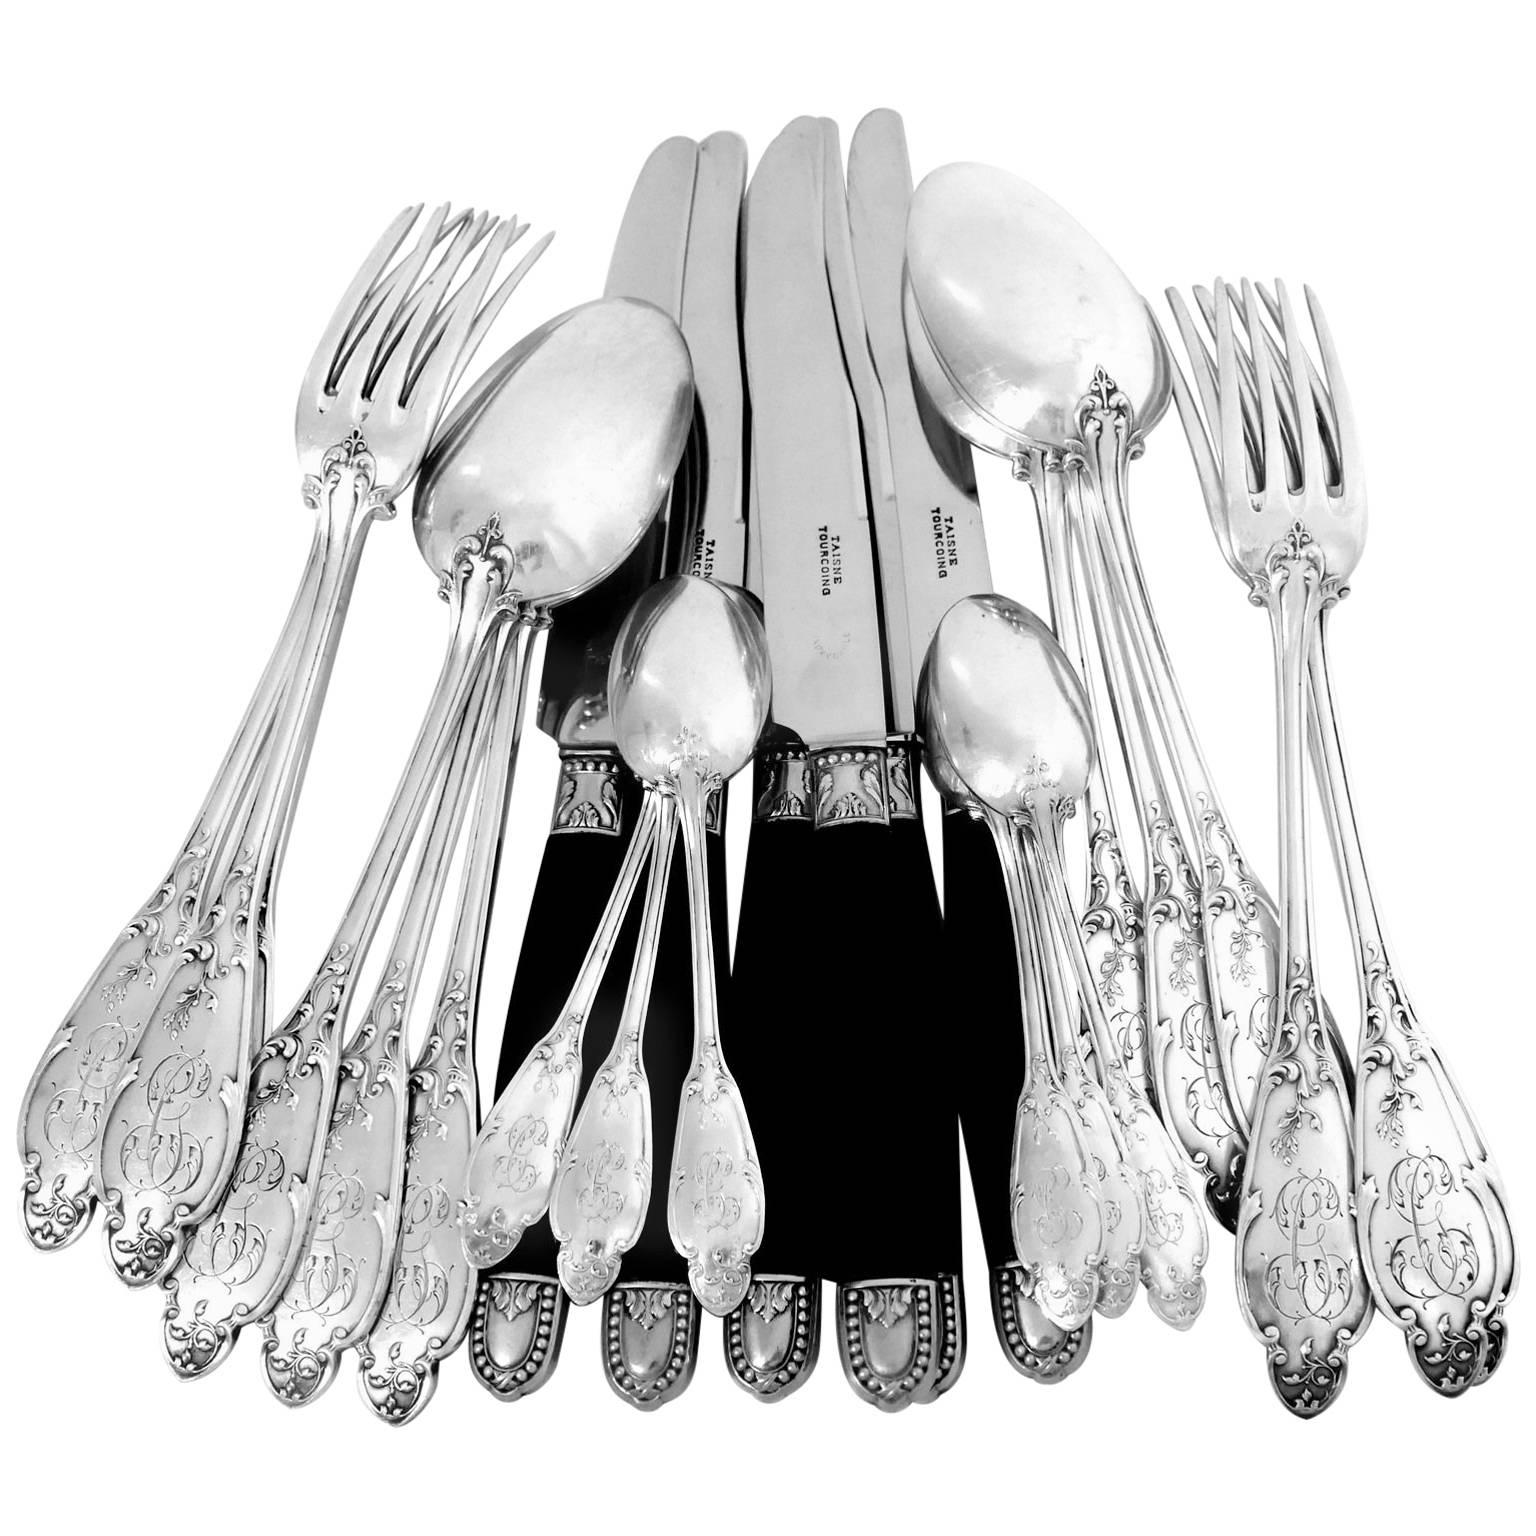 Henin Gorgeous French Sterling Silver Dinner Flatware Set 24 Pieces Flowers For Sale